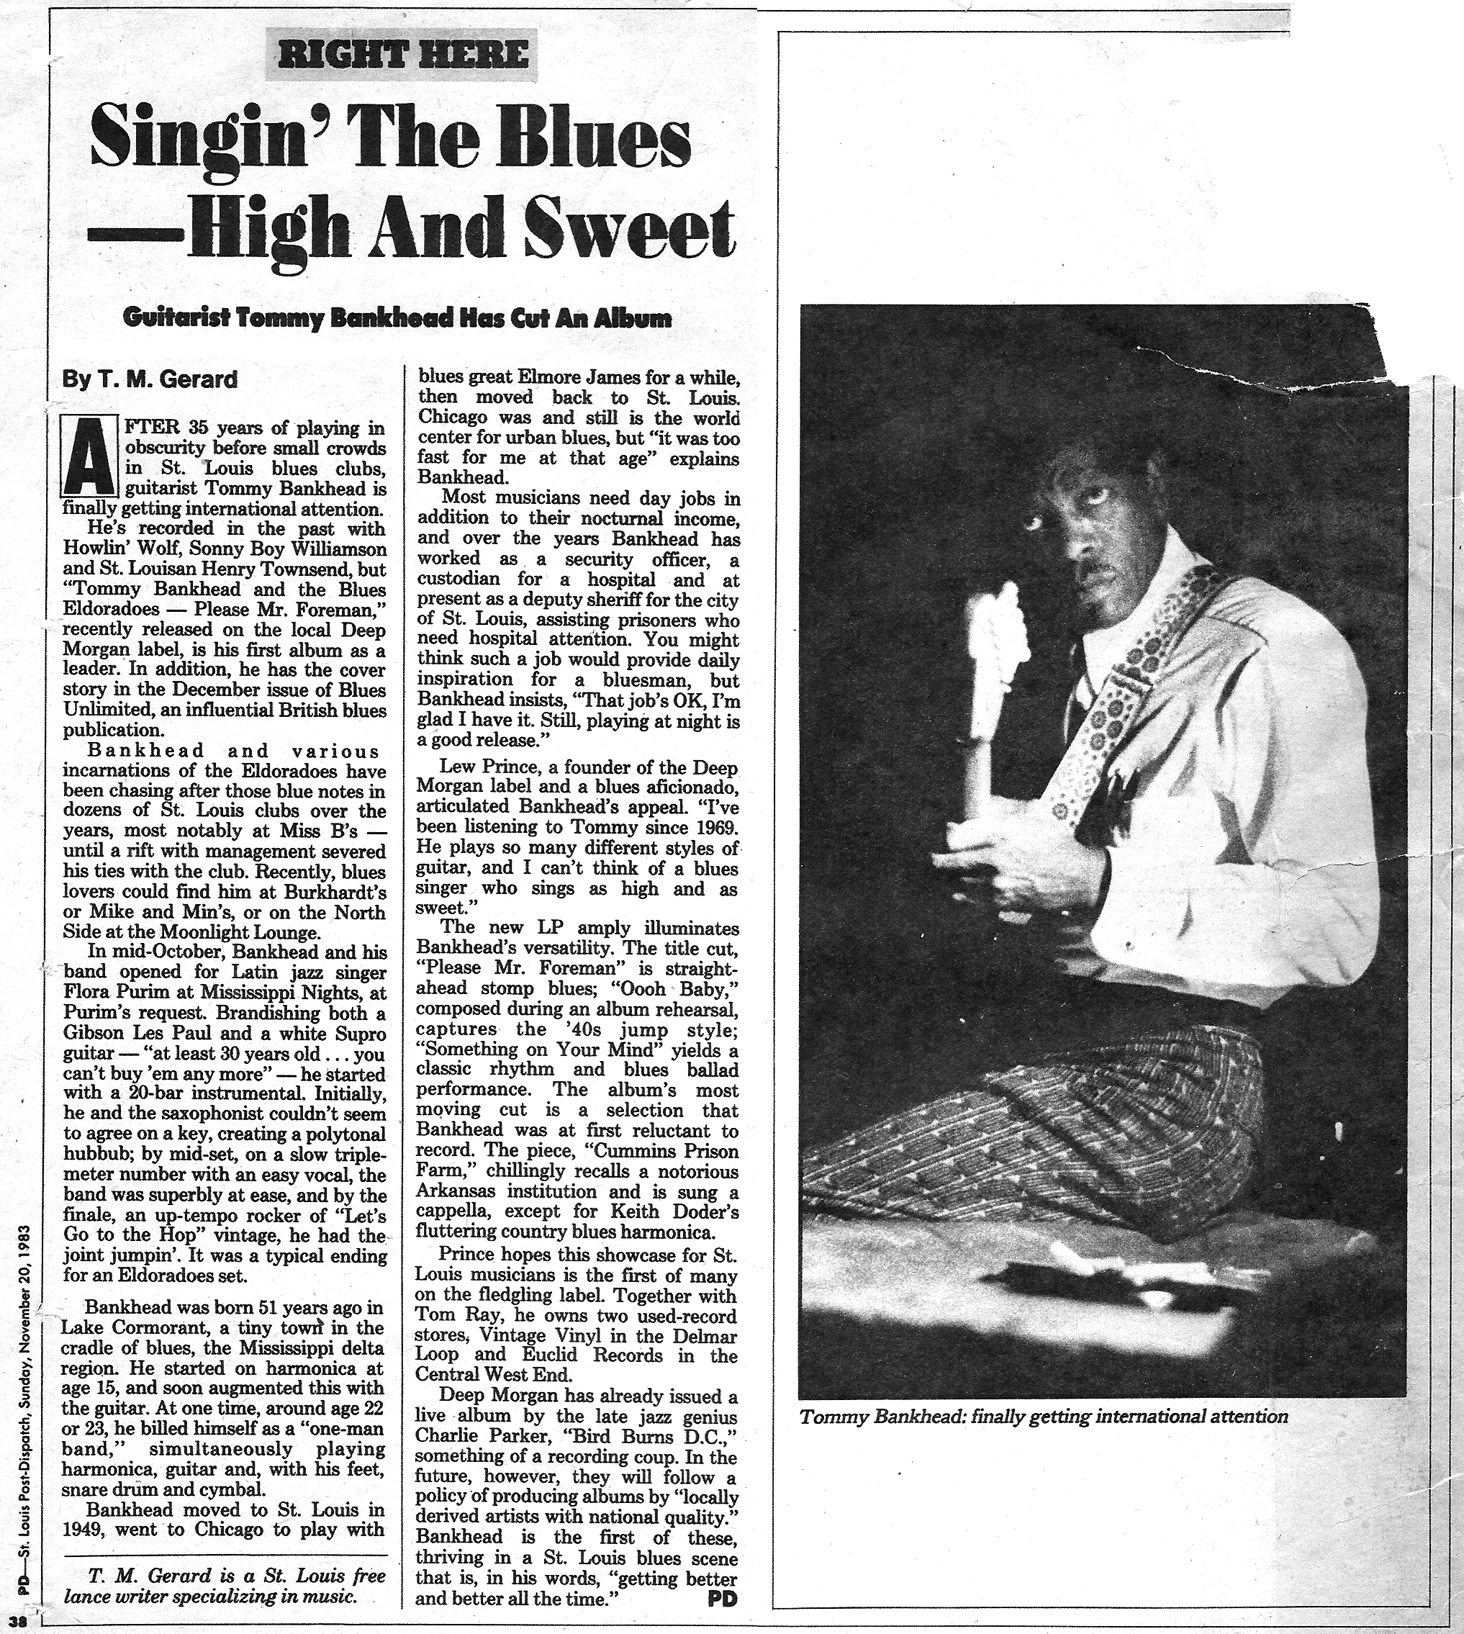 Singin' The Blues - High And Sweet, T. M. Gerard, Post Dispatch, 11-20-1983